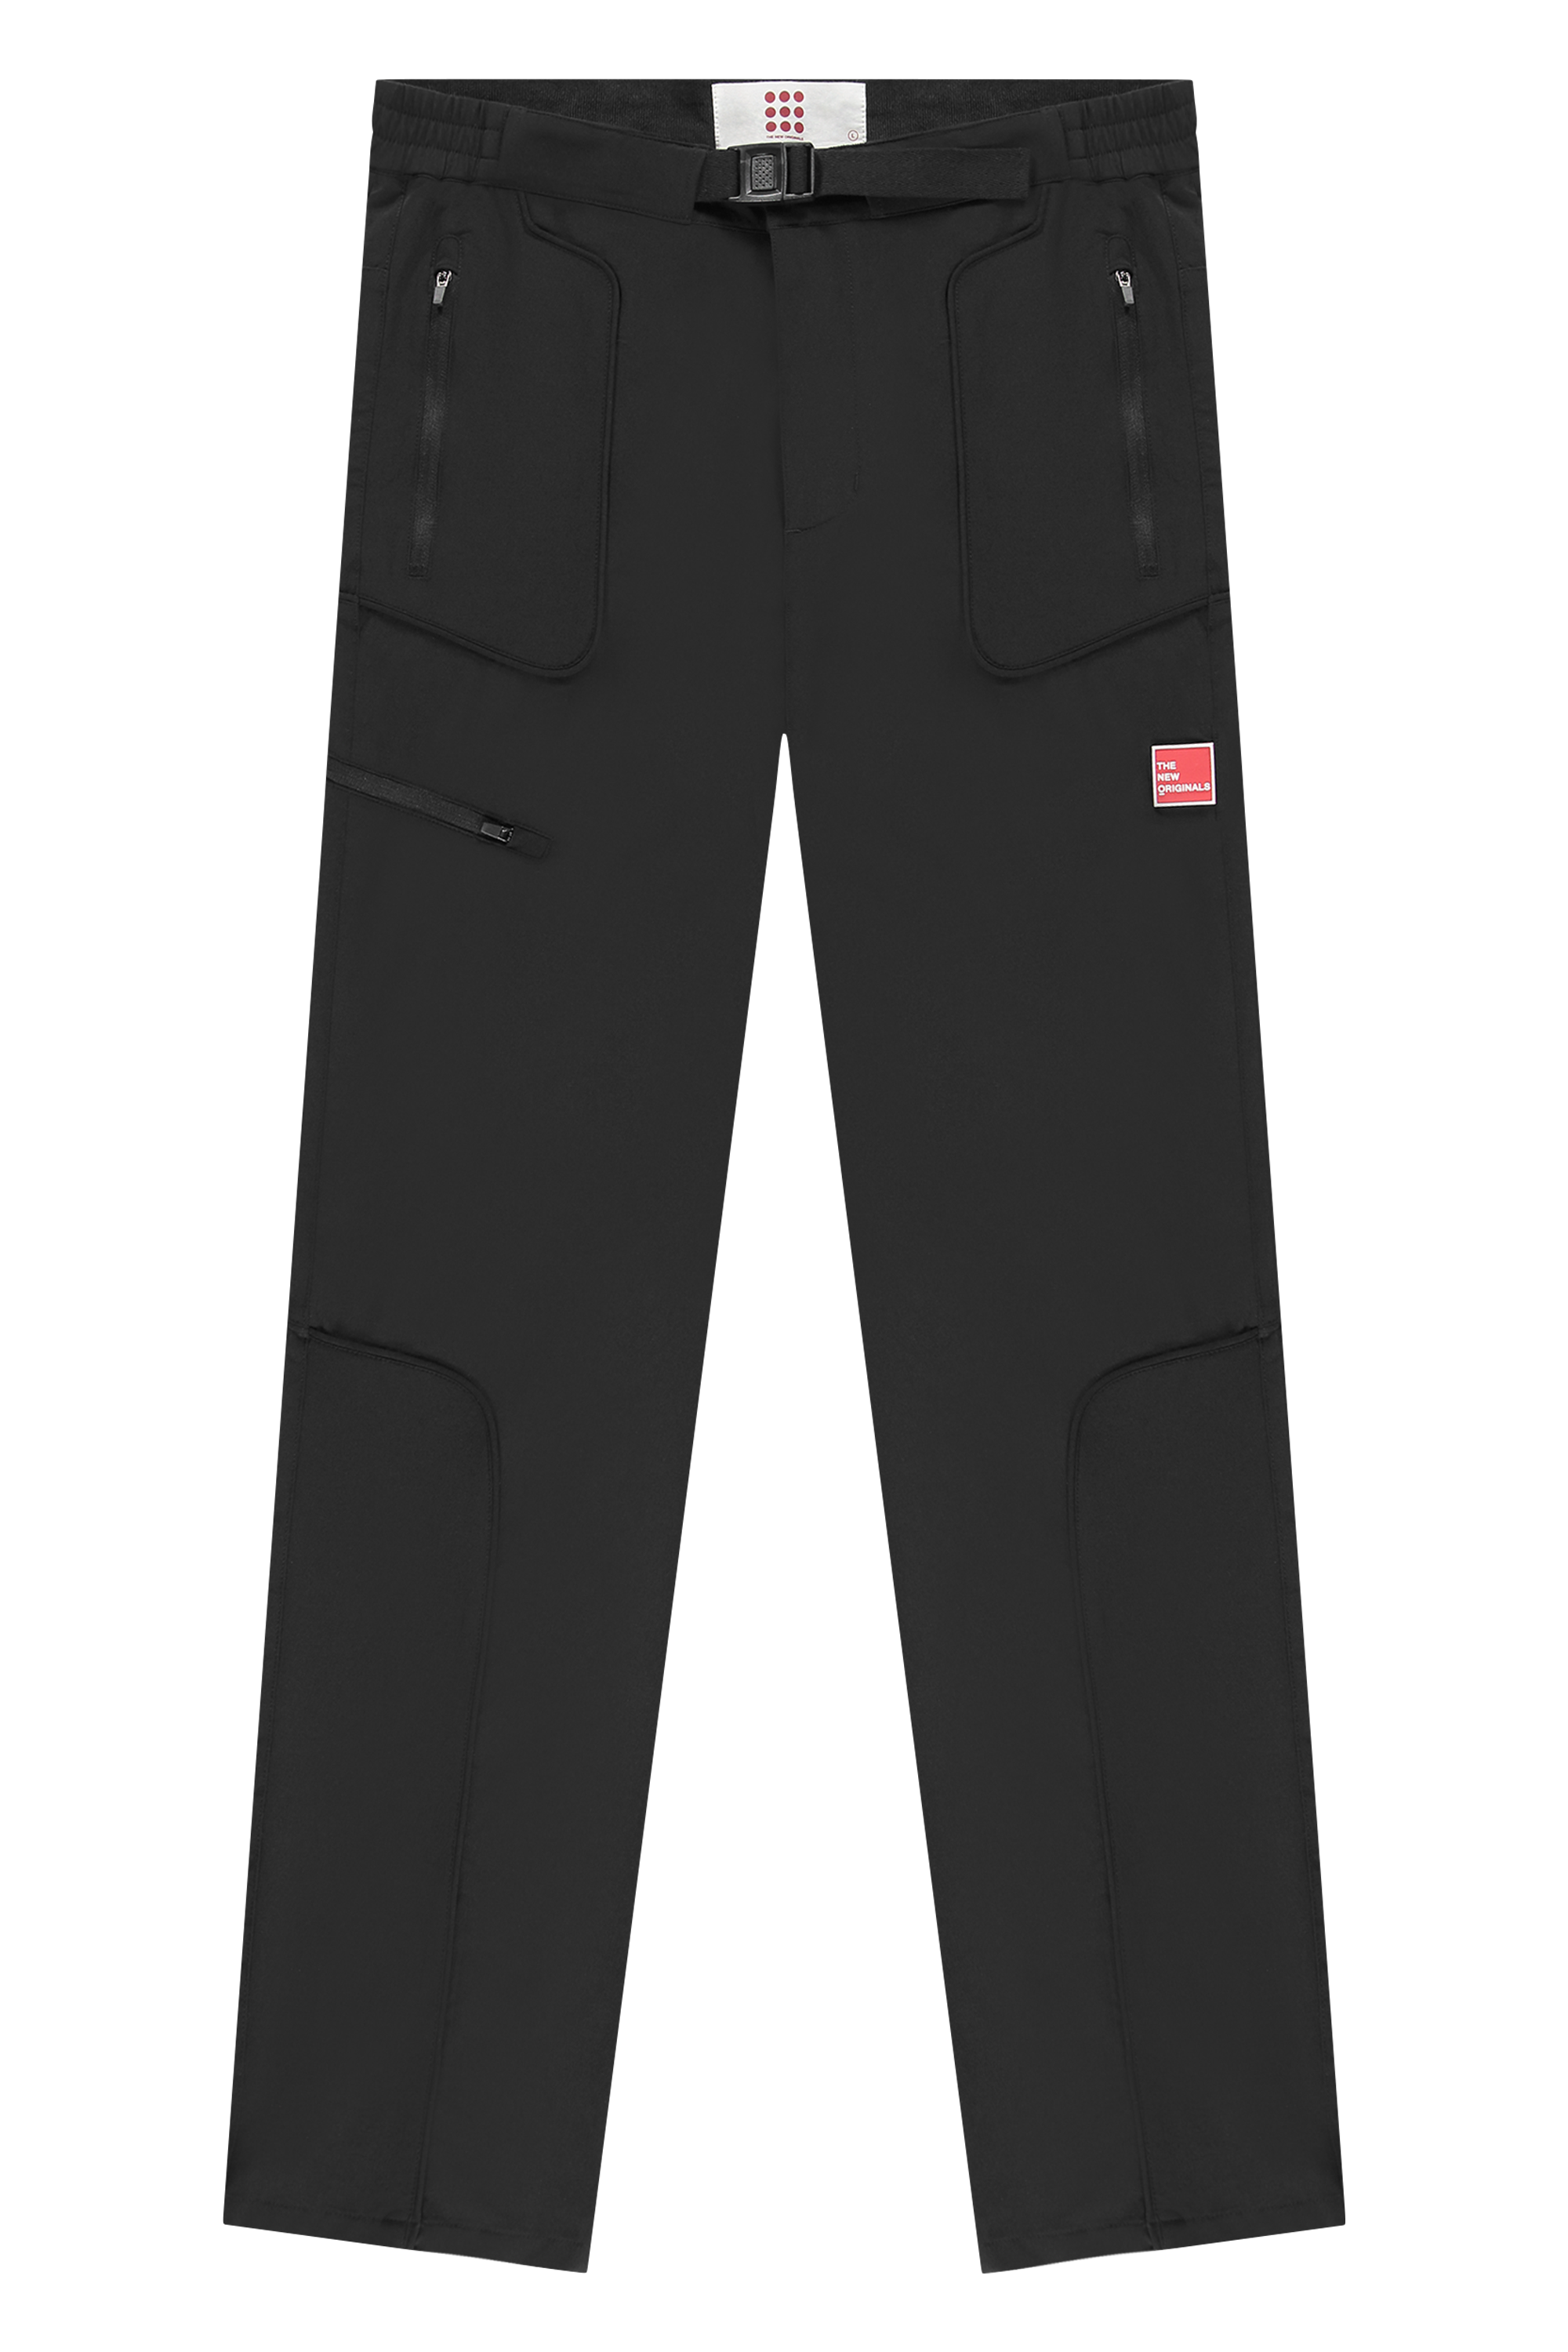 files-enginetrousers_black_front-png